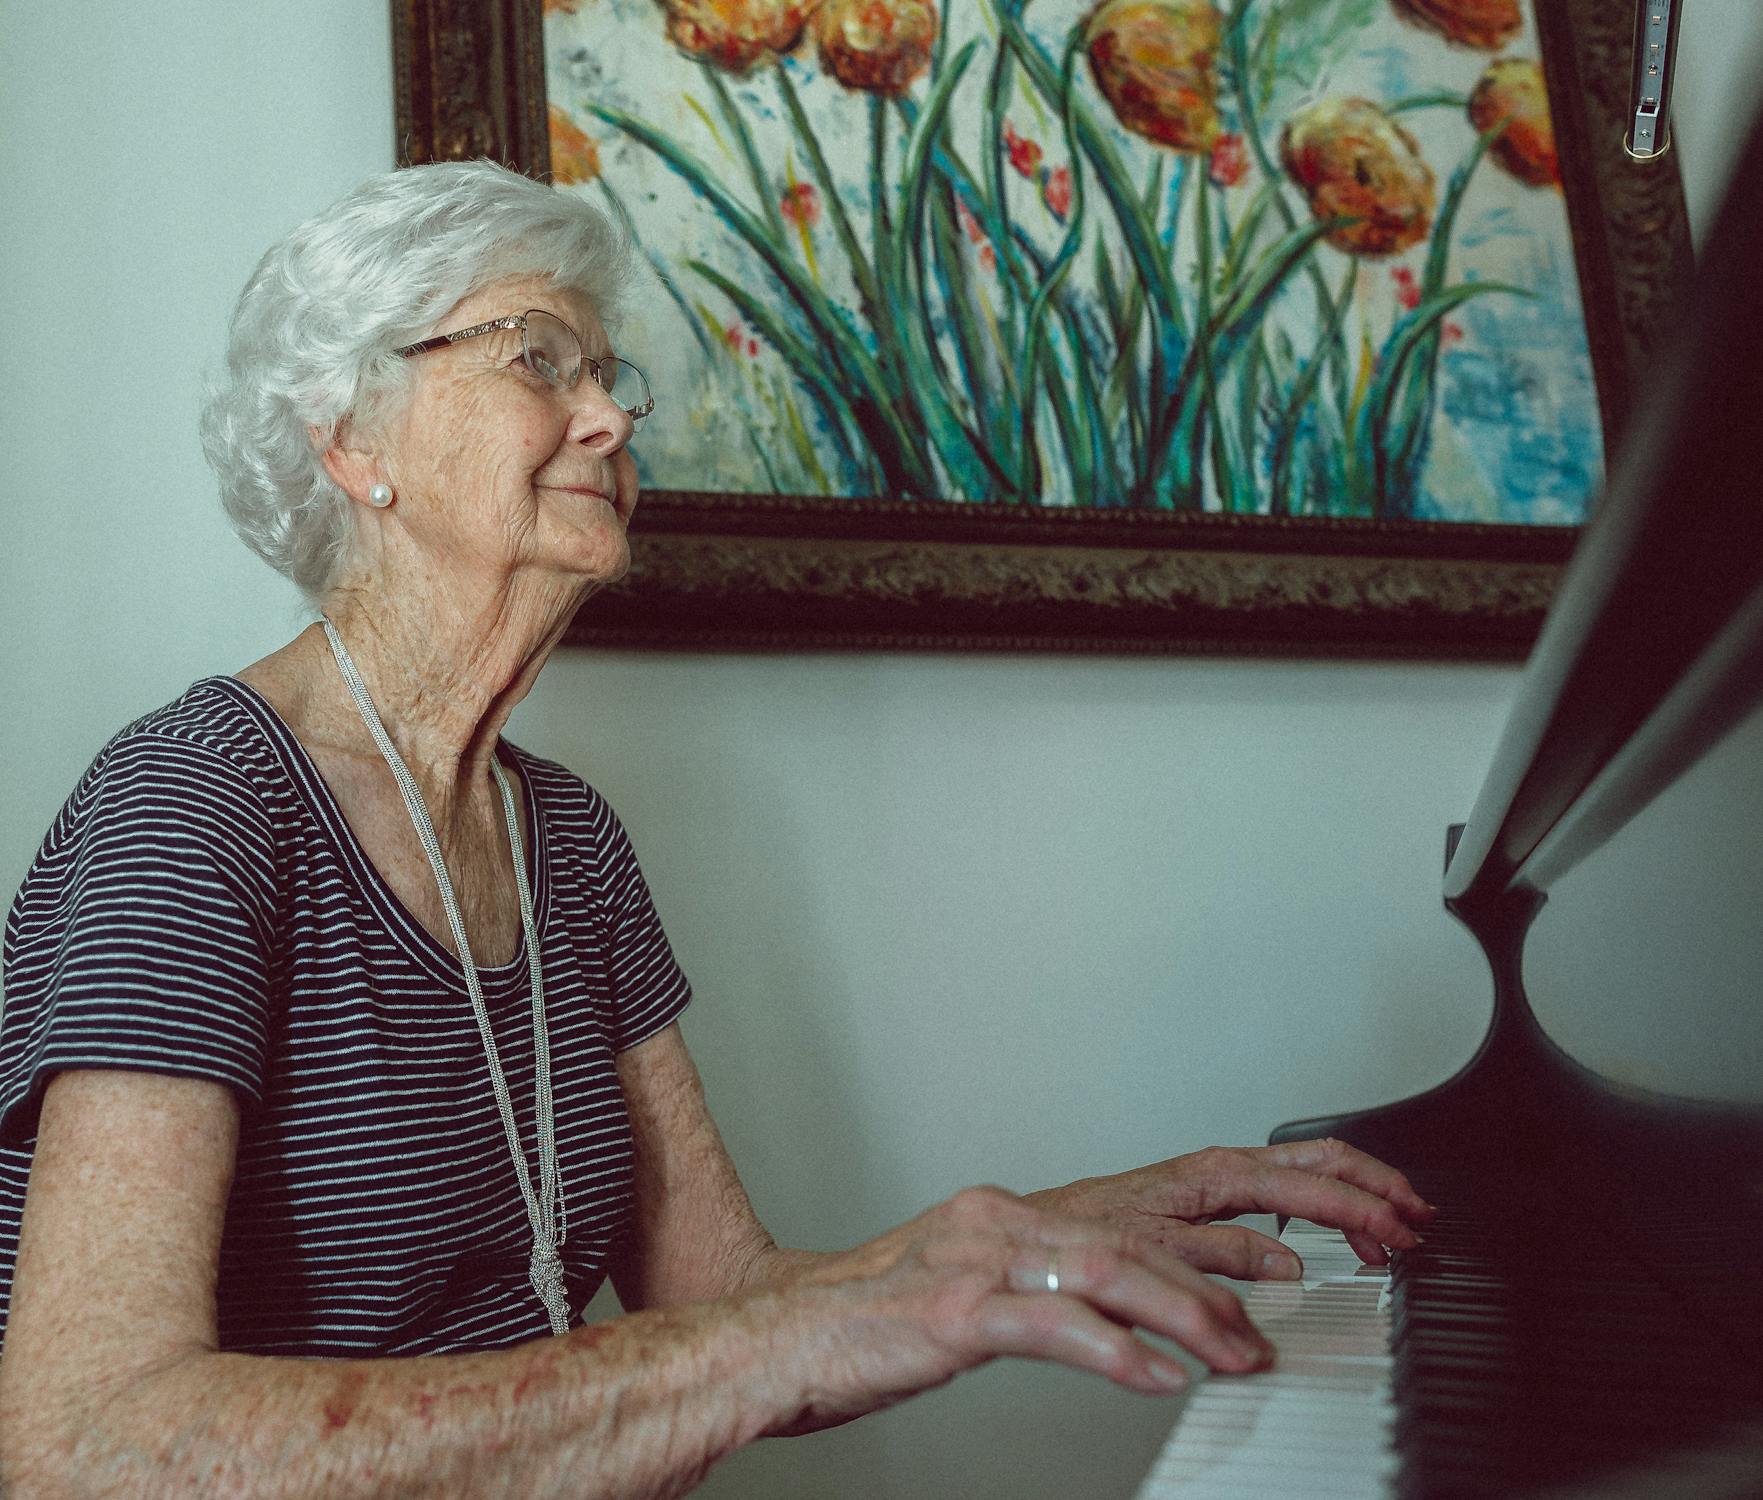 Older woman with white hair, wearing a purple shirt, plays the piano.